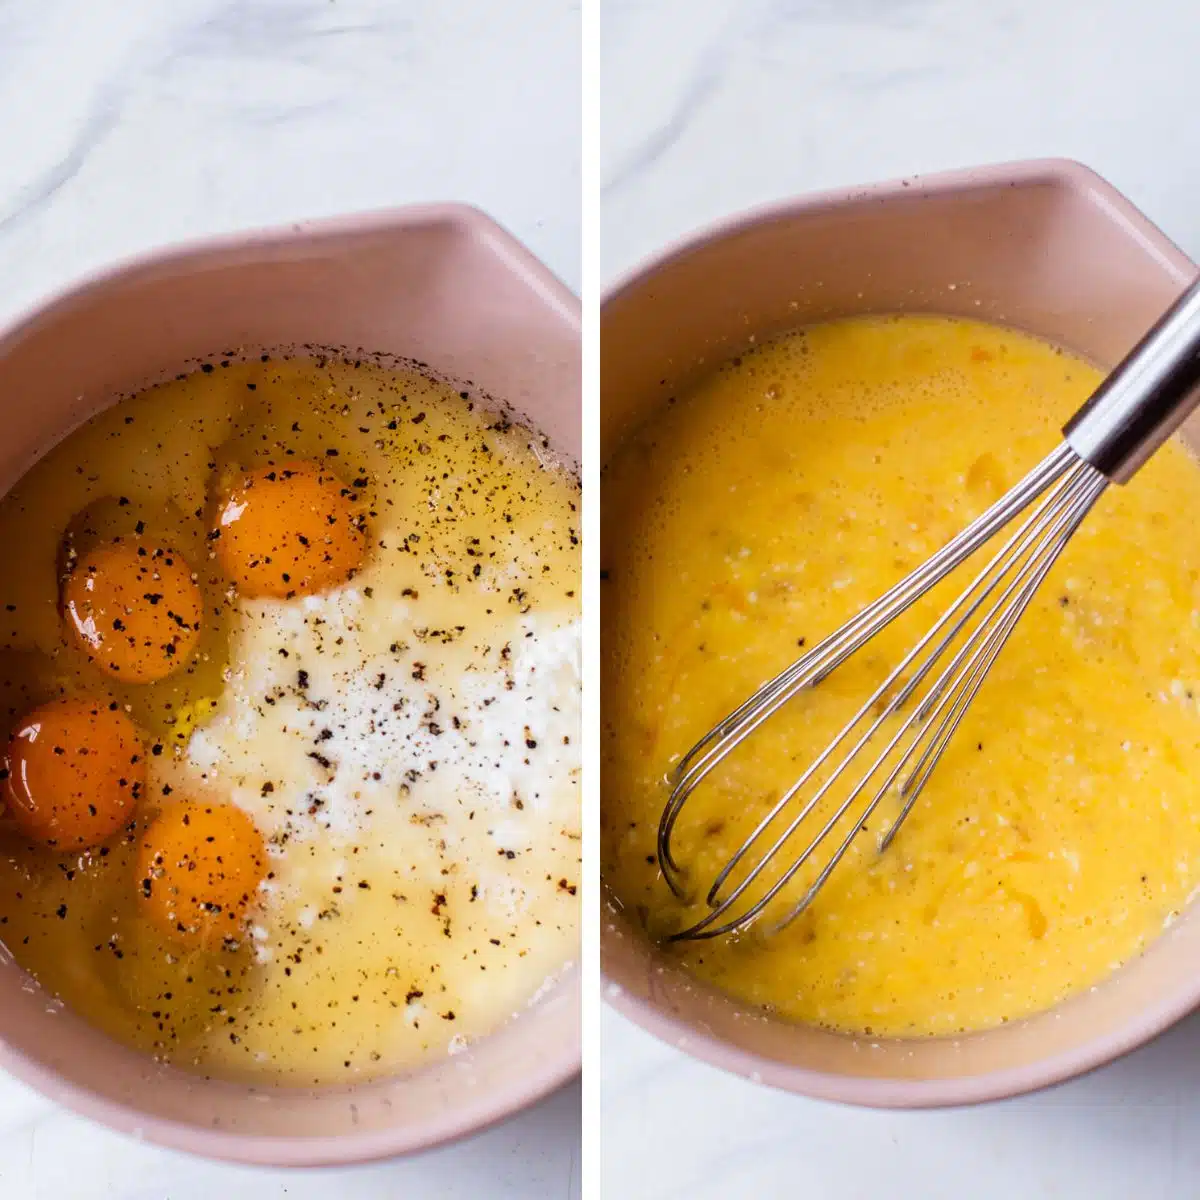 2 images: the left image shows eggs, cottage cheese, and spices in a bowl while the right image shows those ingredients whisked together in a bowl